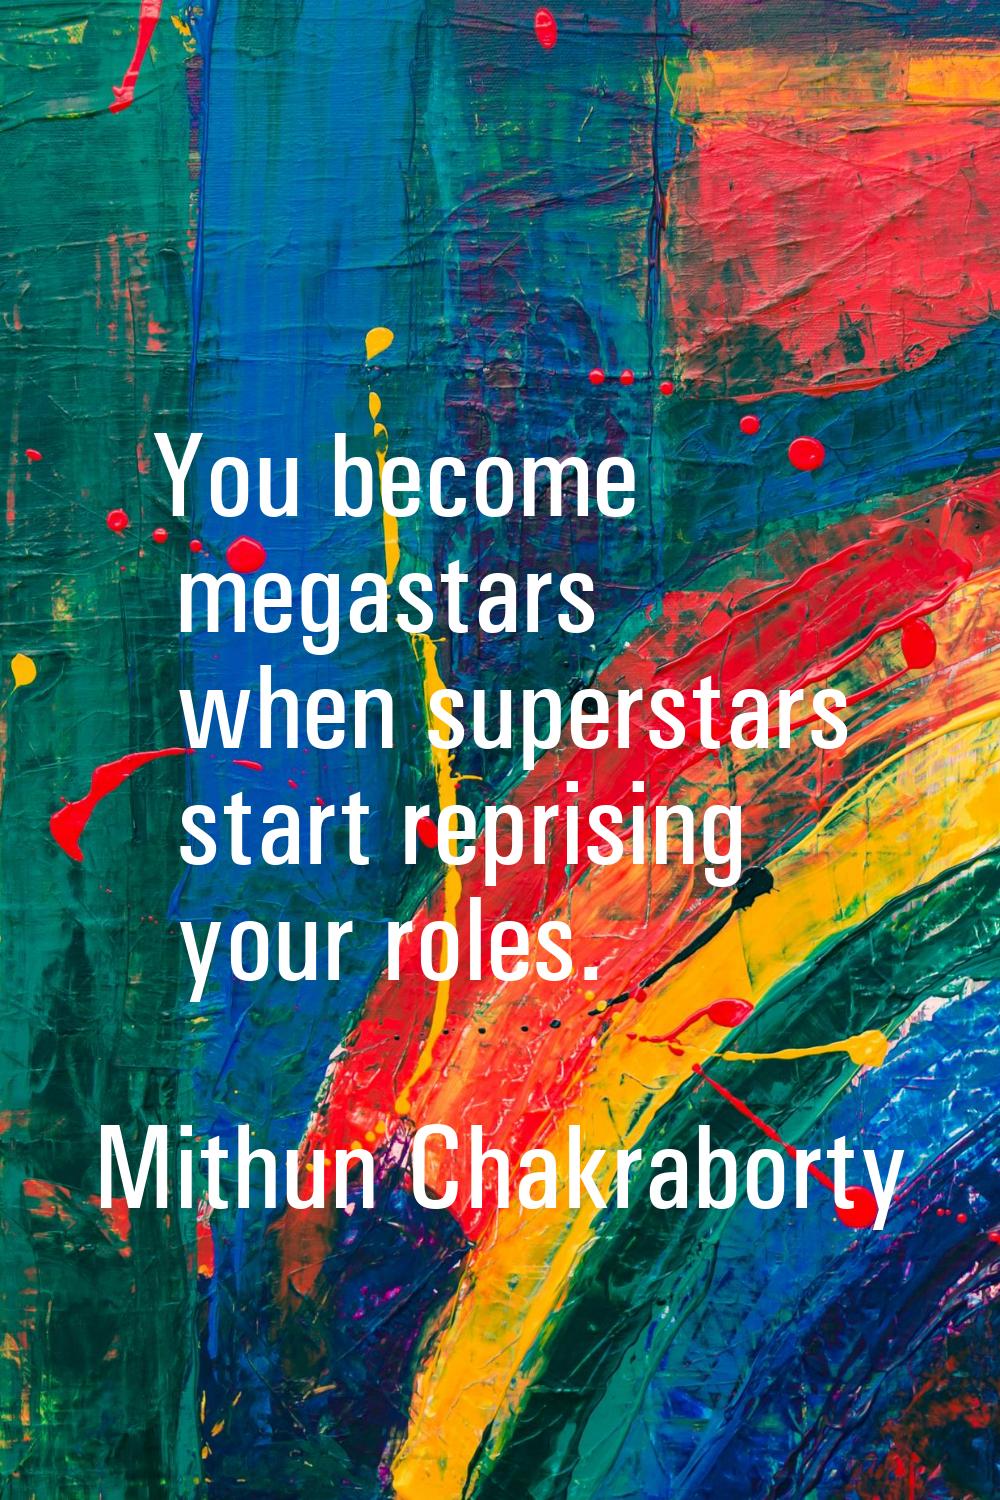 You become megastars when superstars start reprising your roles.